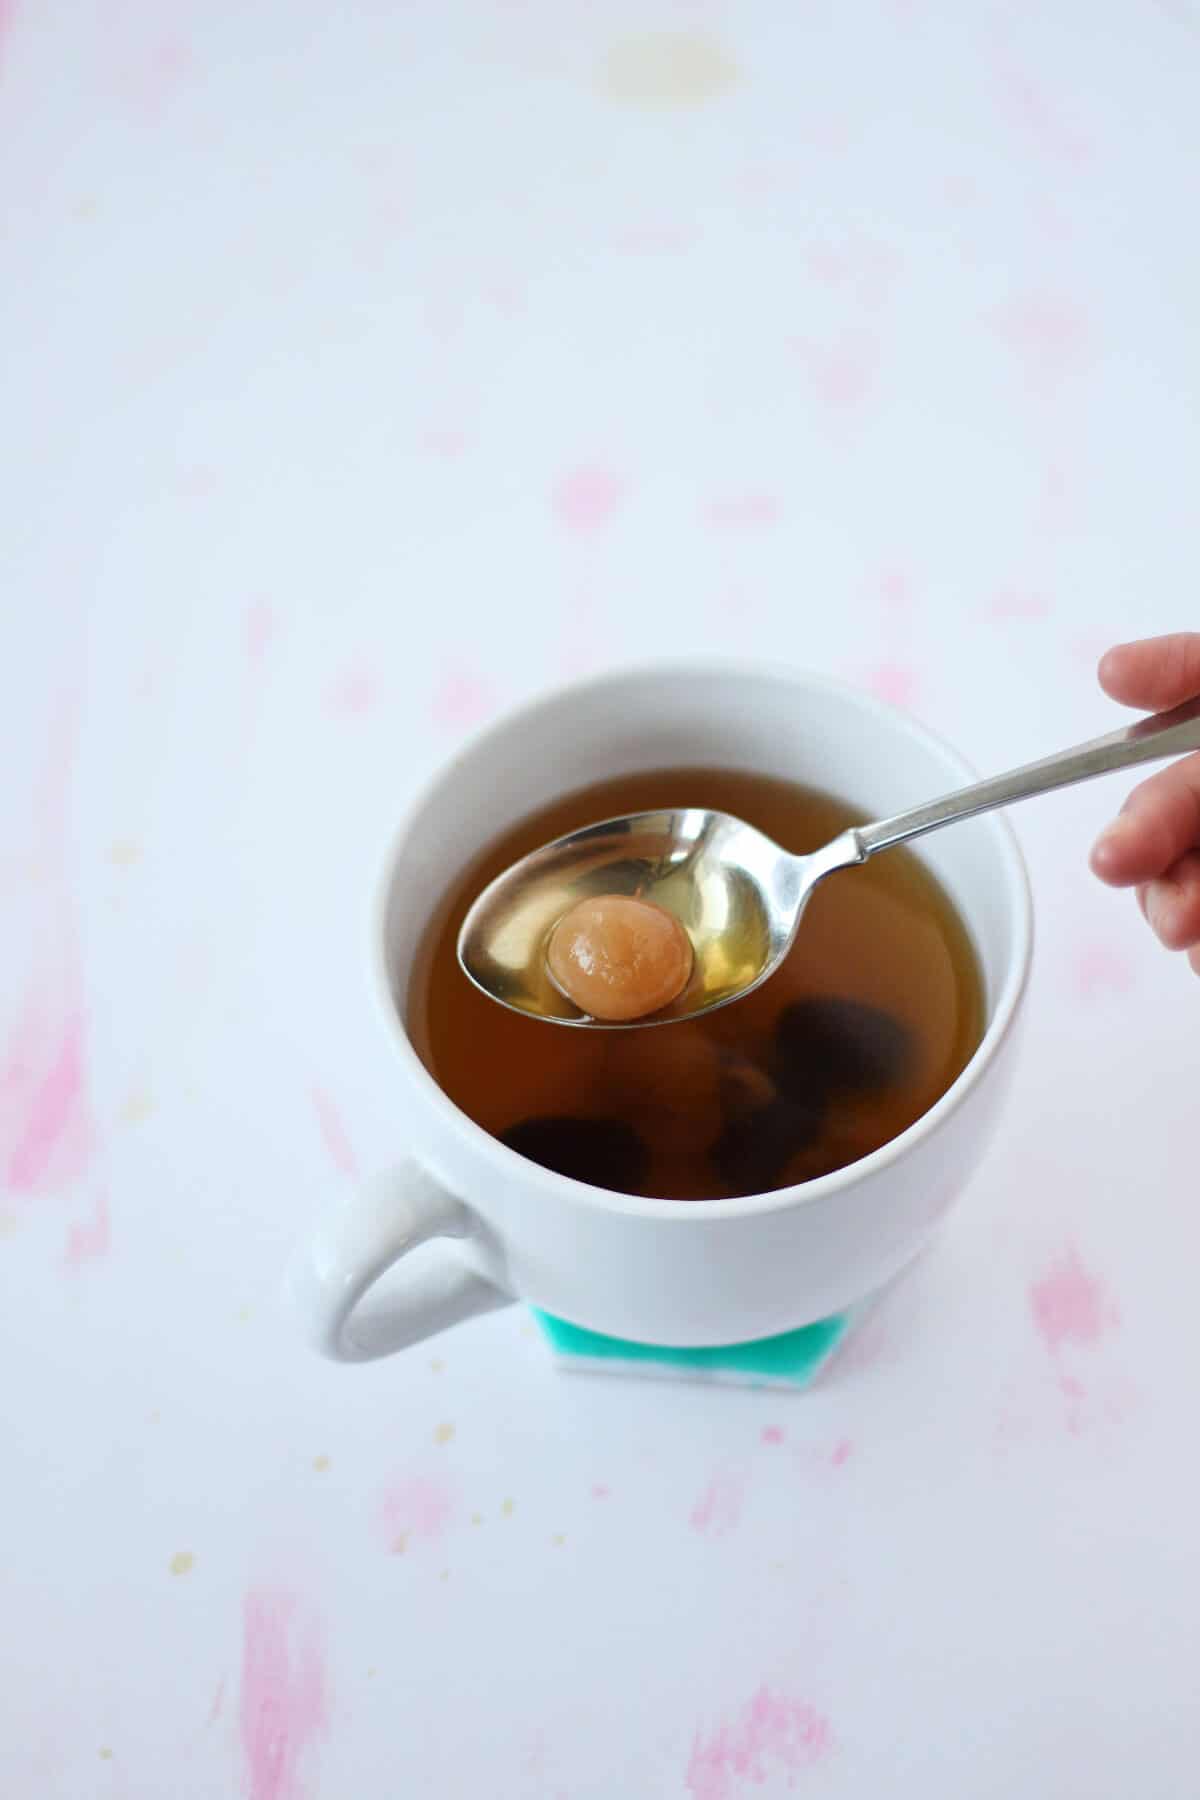  Hand holding spoon filled with longan over cup of reddish brown tea.